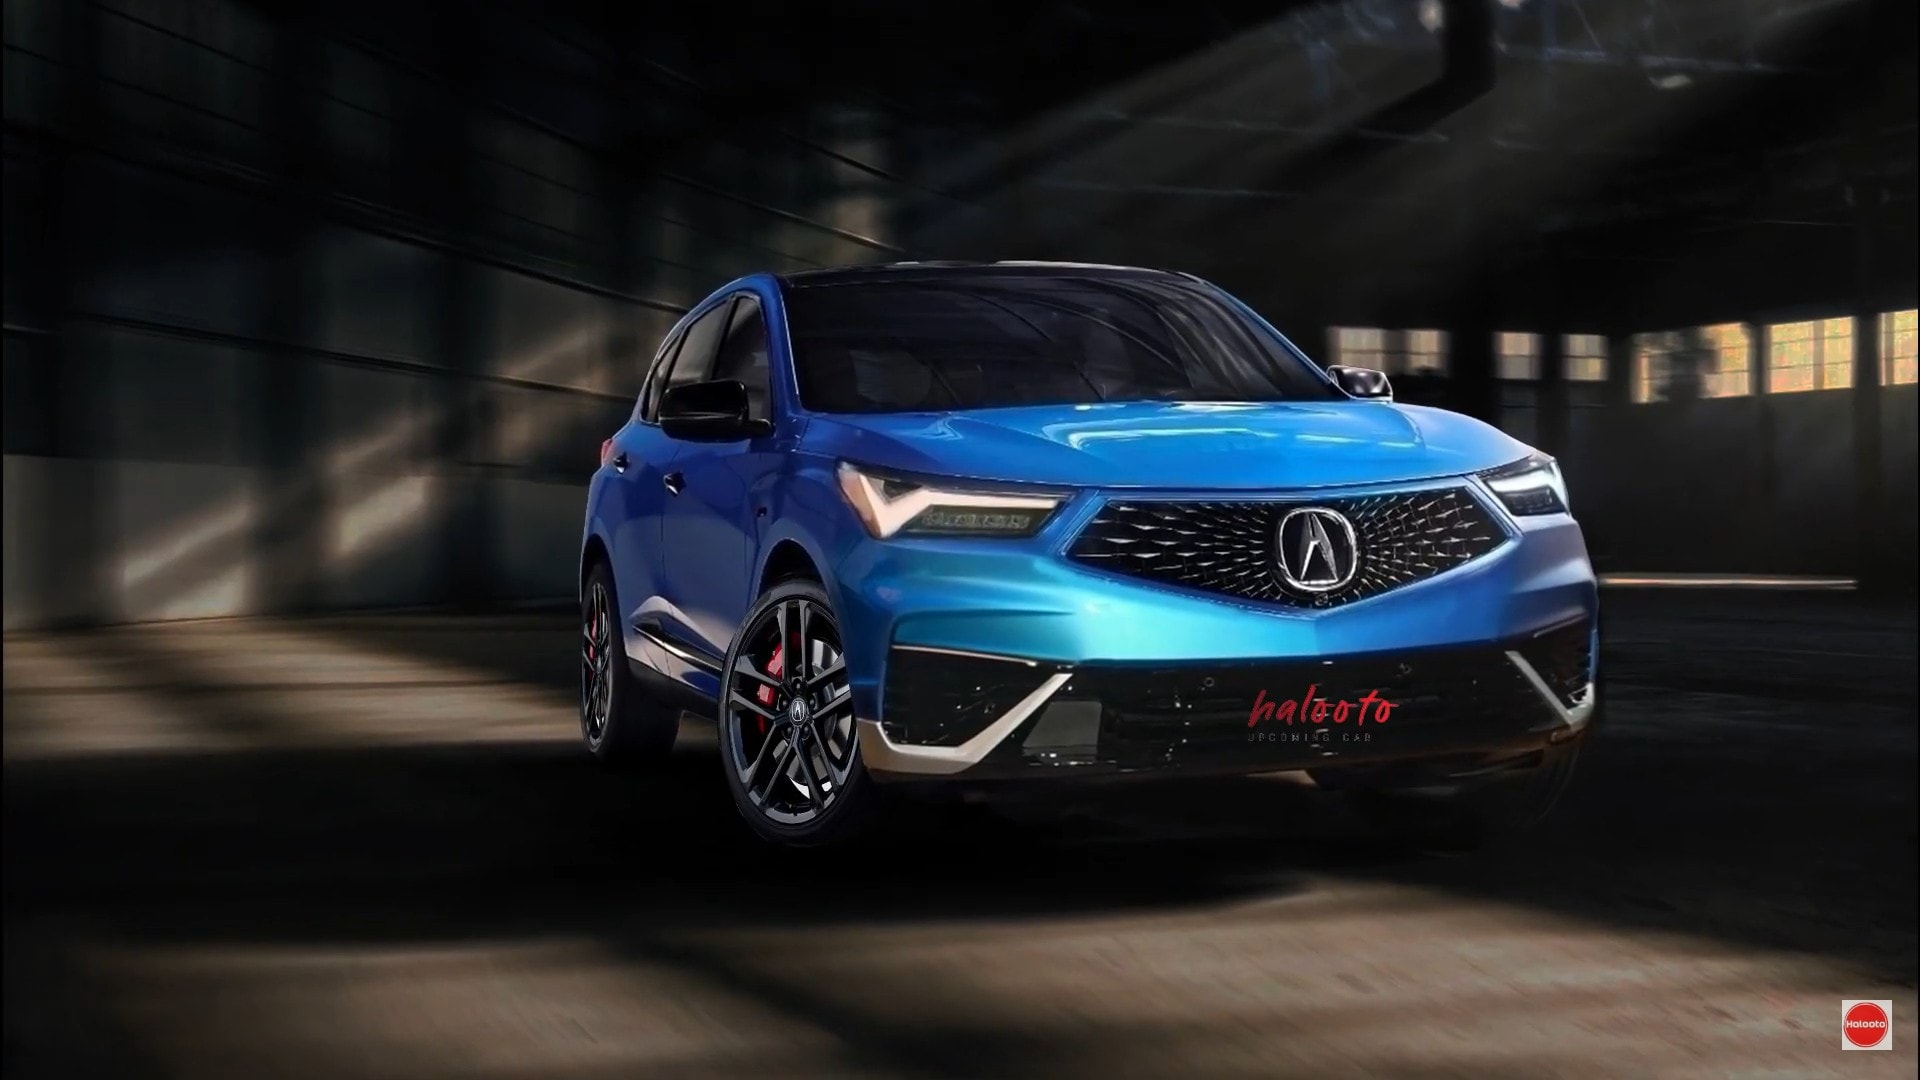 https://s1.cdn.autoevolution.com/images/news/redesigned-2025-acura-rdx-type-s-comes-out-refreshed-from-behind-the-cgi-curtain-229104_1.jpg